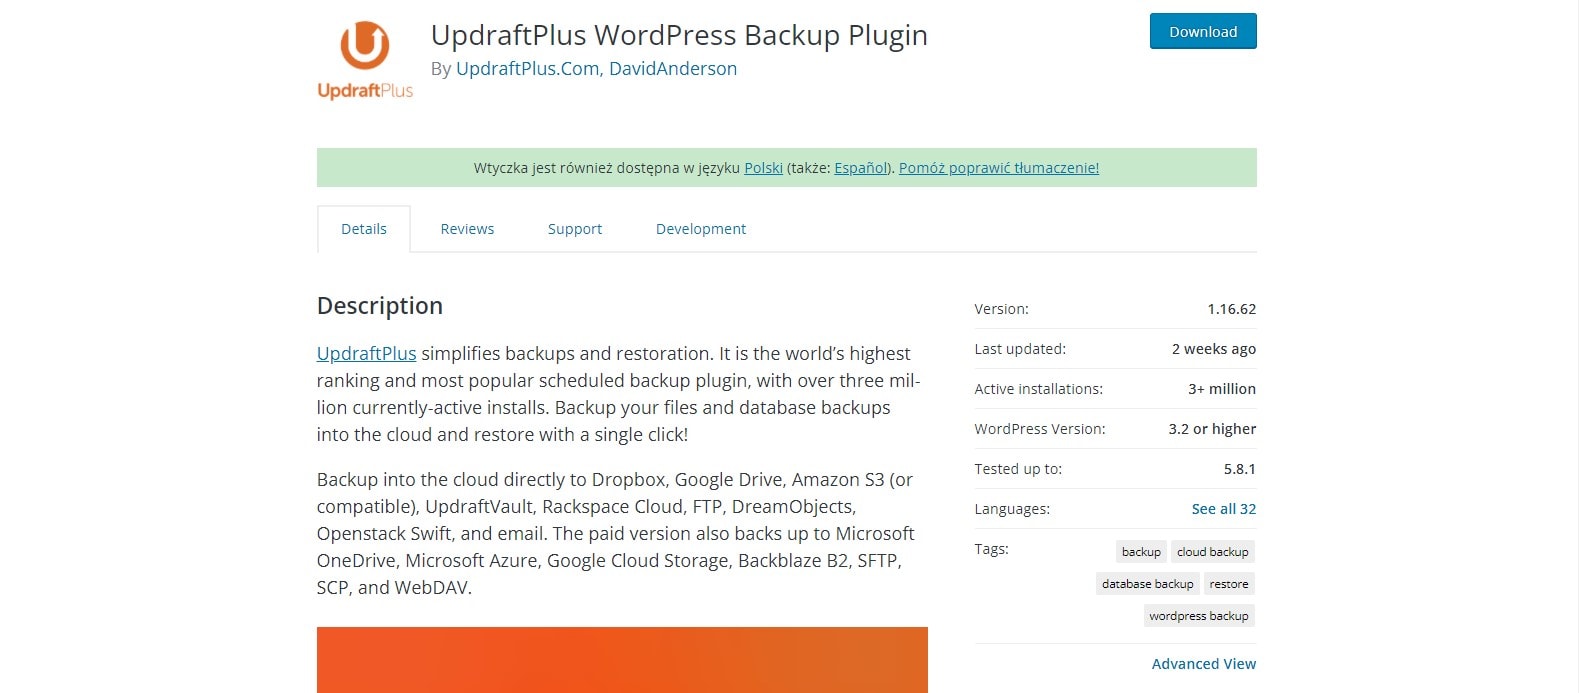 The website for the UpdraftPlus WordPress Backup Plugin with the plugin's icon and description